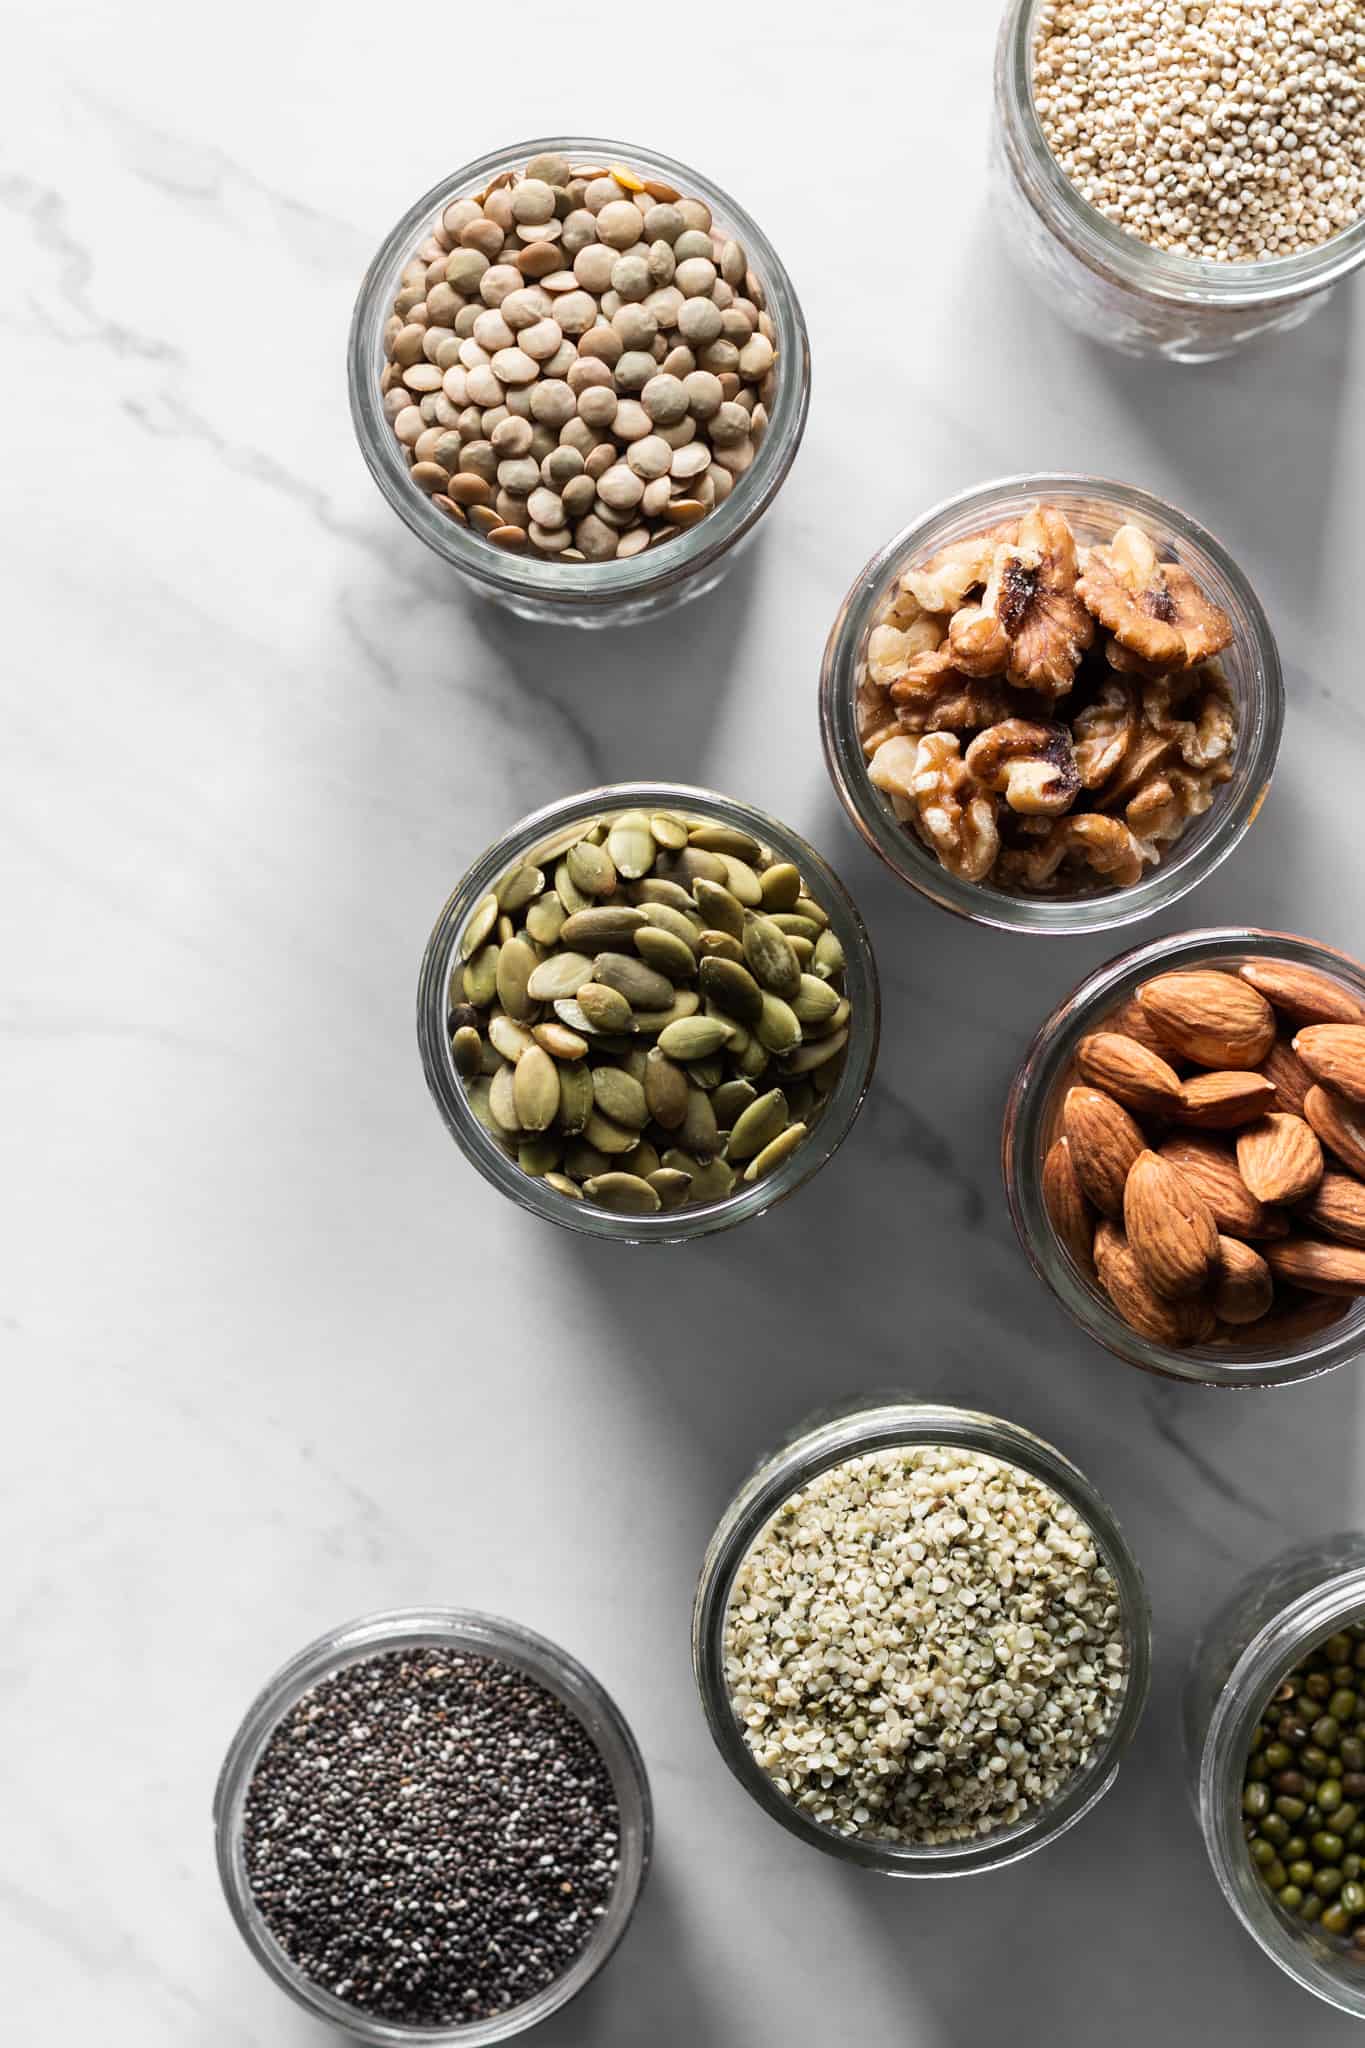 Vegan Protein Sources + How to Use Them